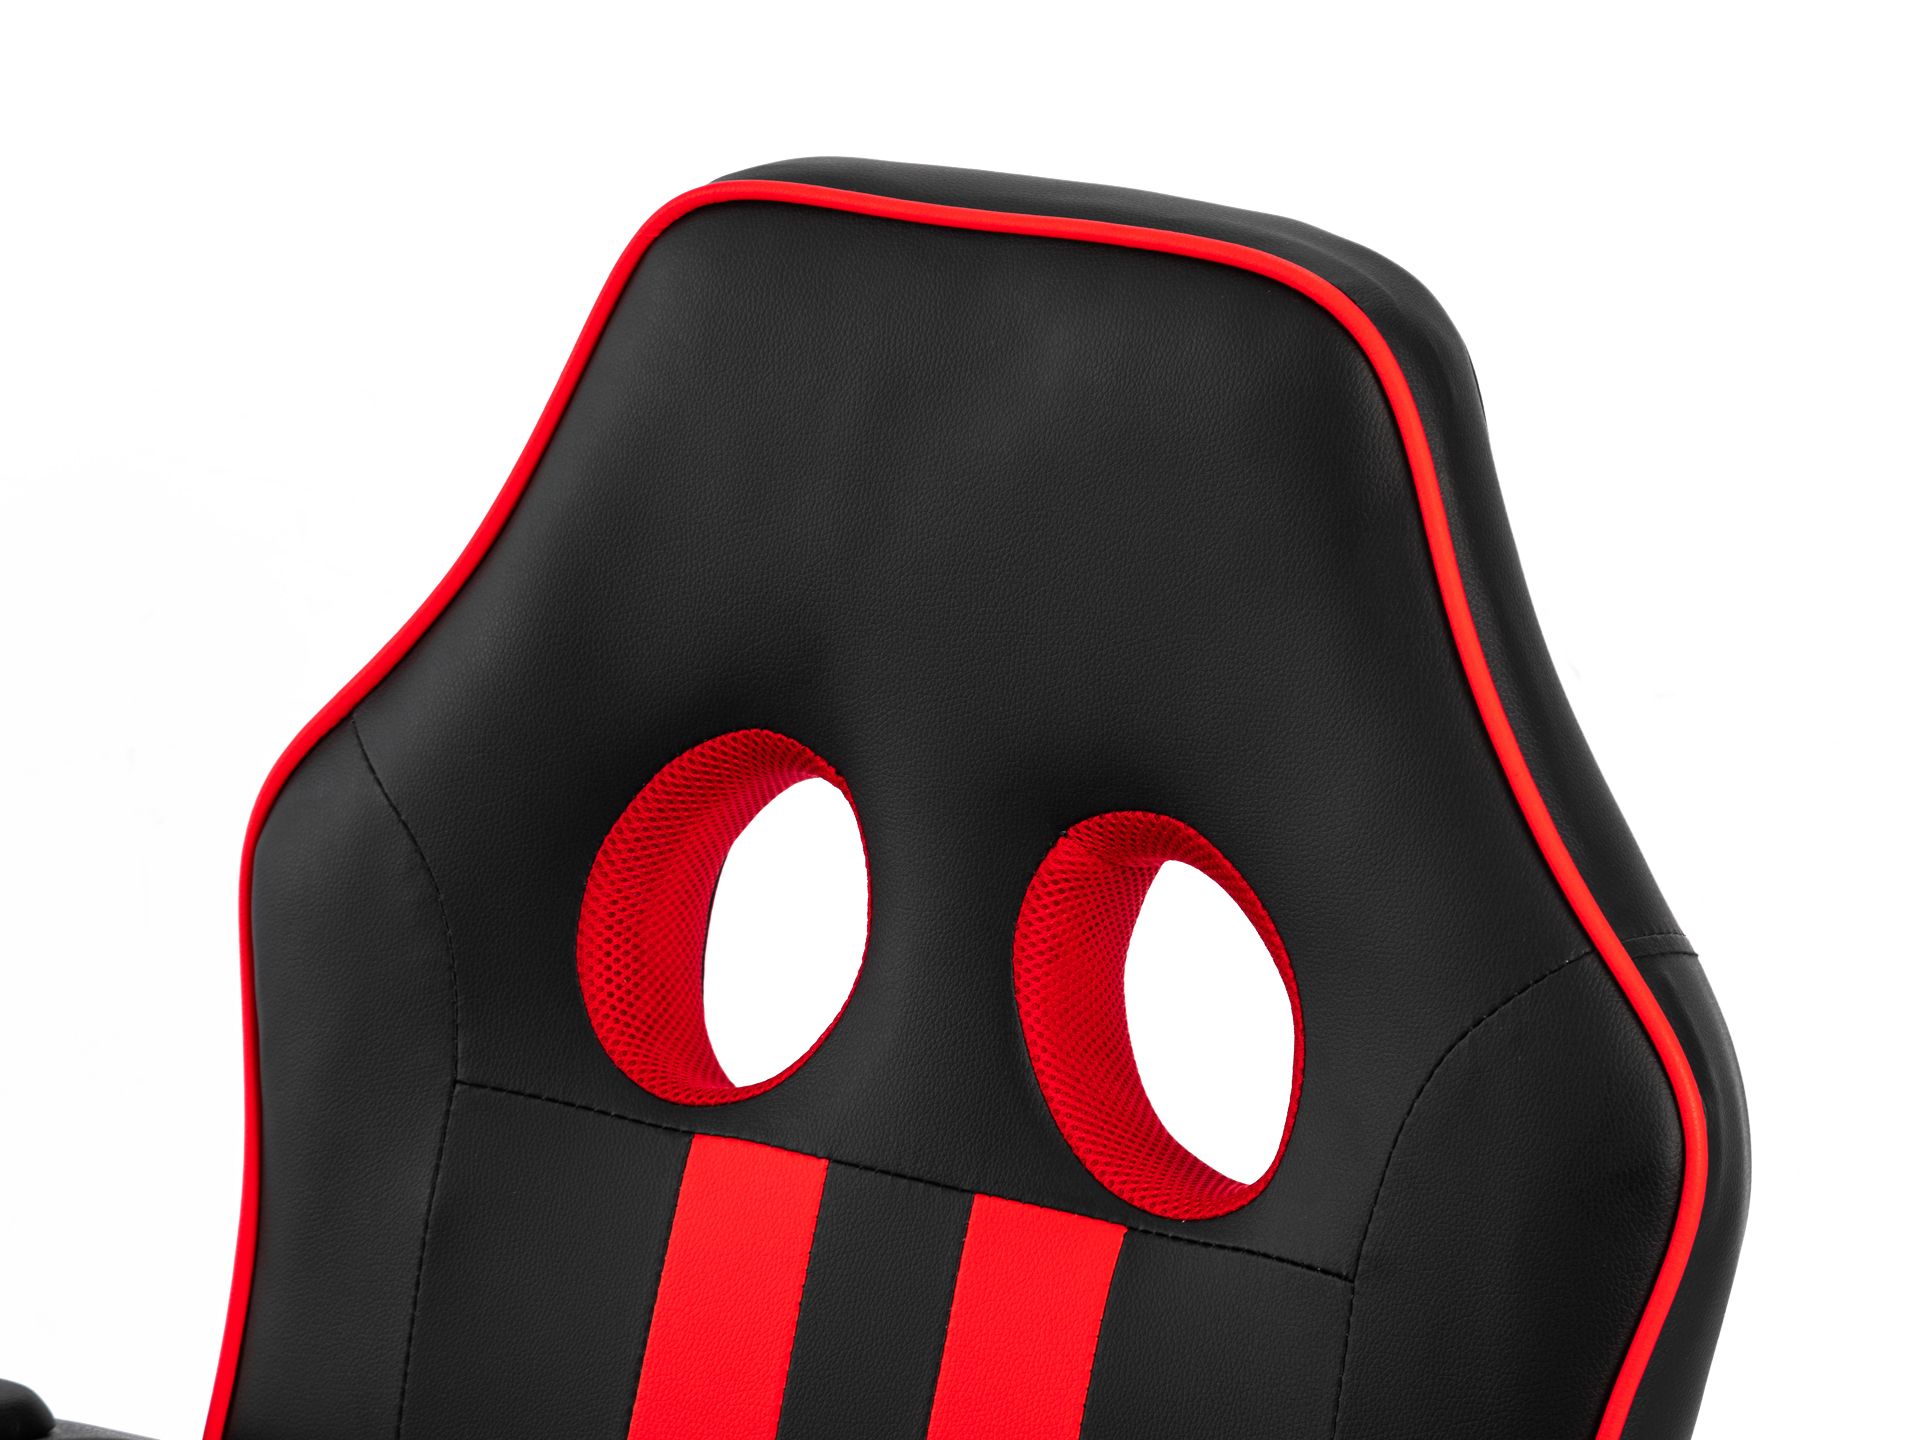 Detroit Gaming Chair - Black + Red